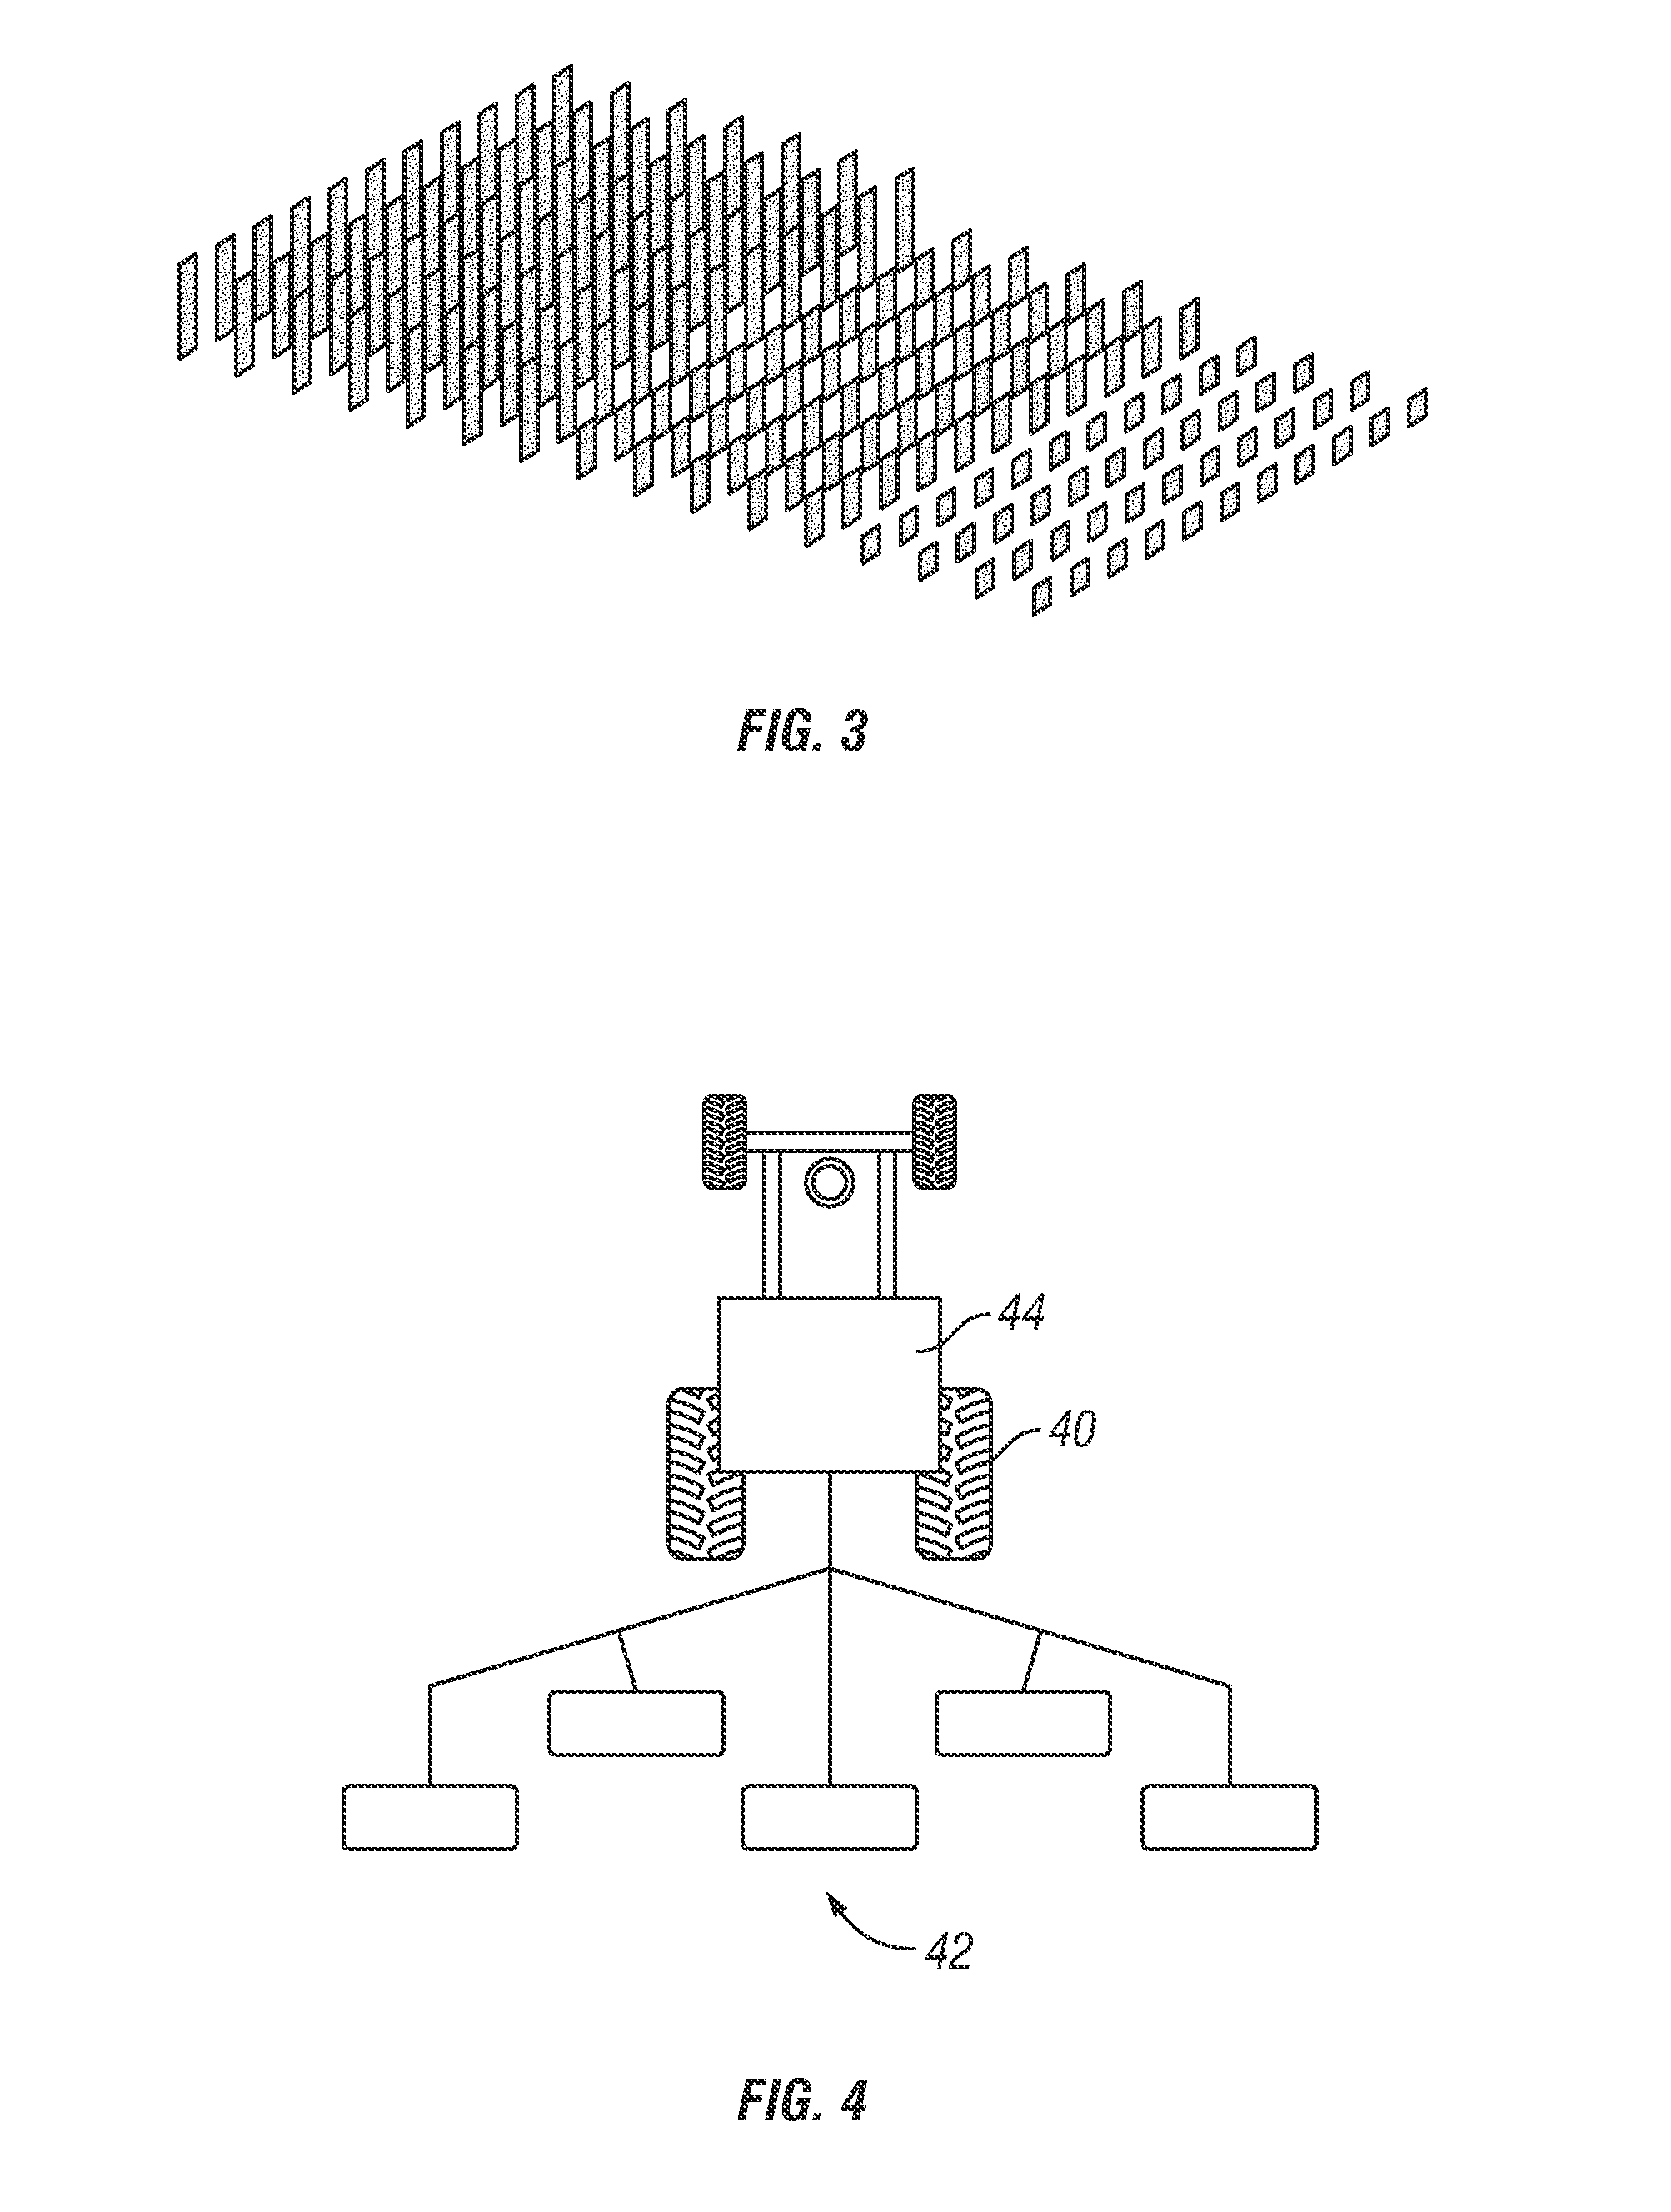 Method and apparatus for creating visual effects on grass